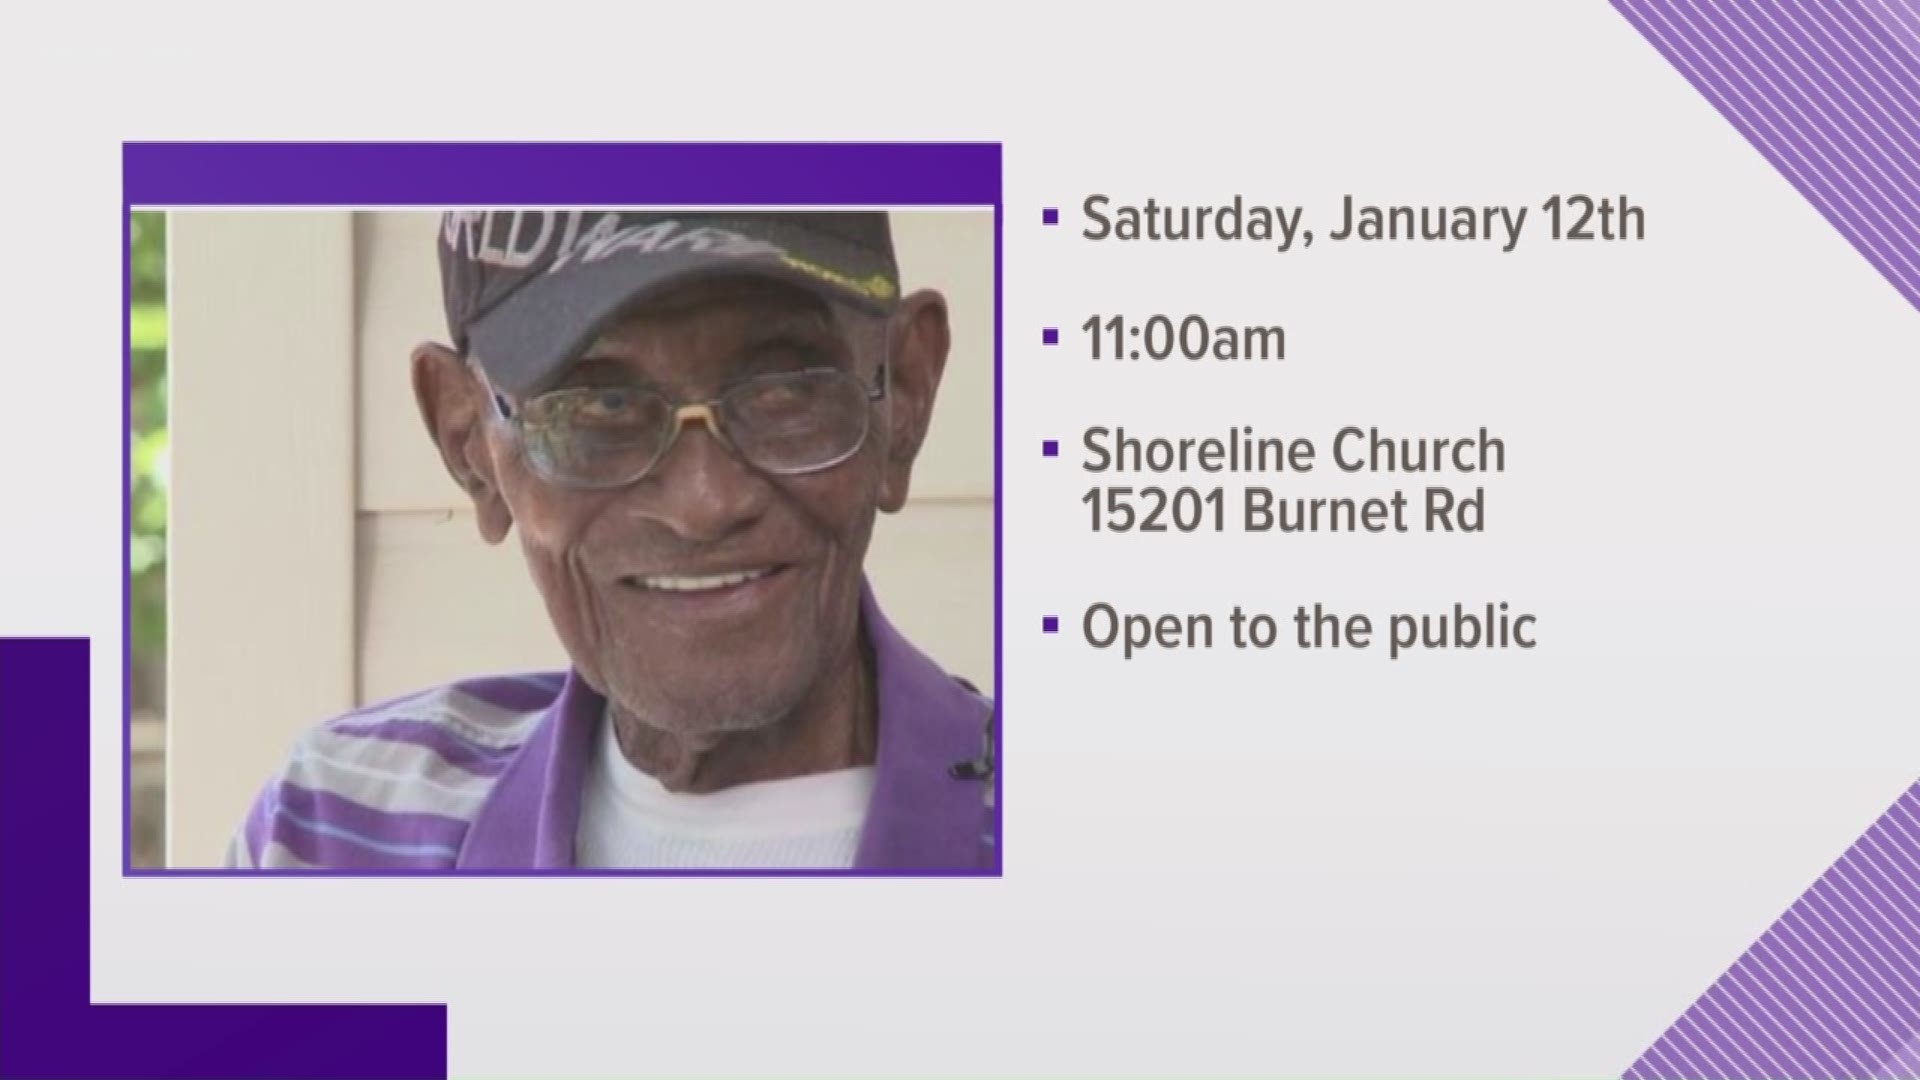 Mr. Overton's funeral is planned for Saturday, Jan. 12 at 11 a.m. at Shoreline Church. It will be open to the public.